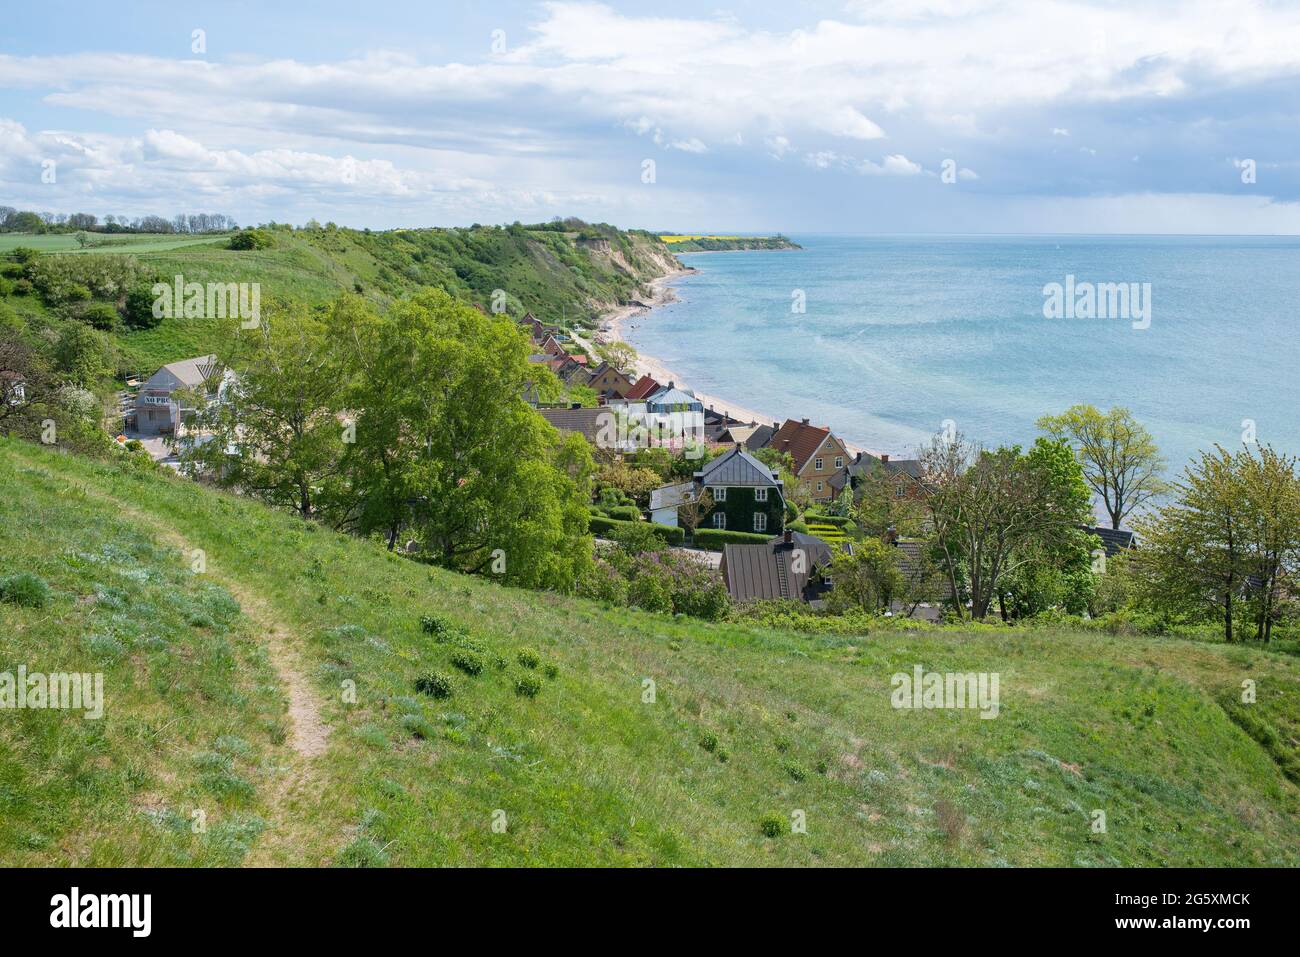 Coastline of the island Ven as seen from St Ibbs kyrka on the west side of the island Stock Photo